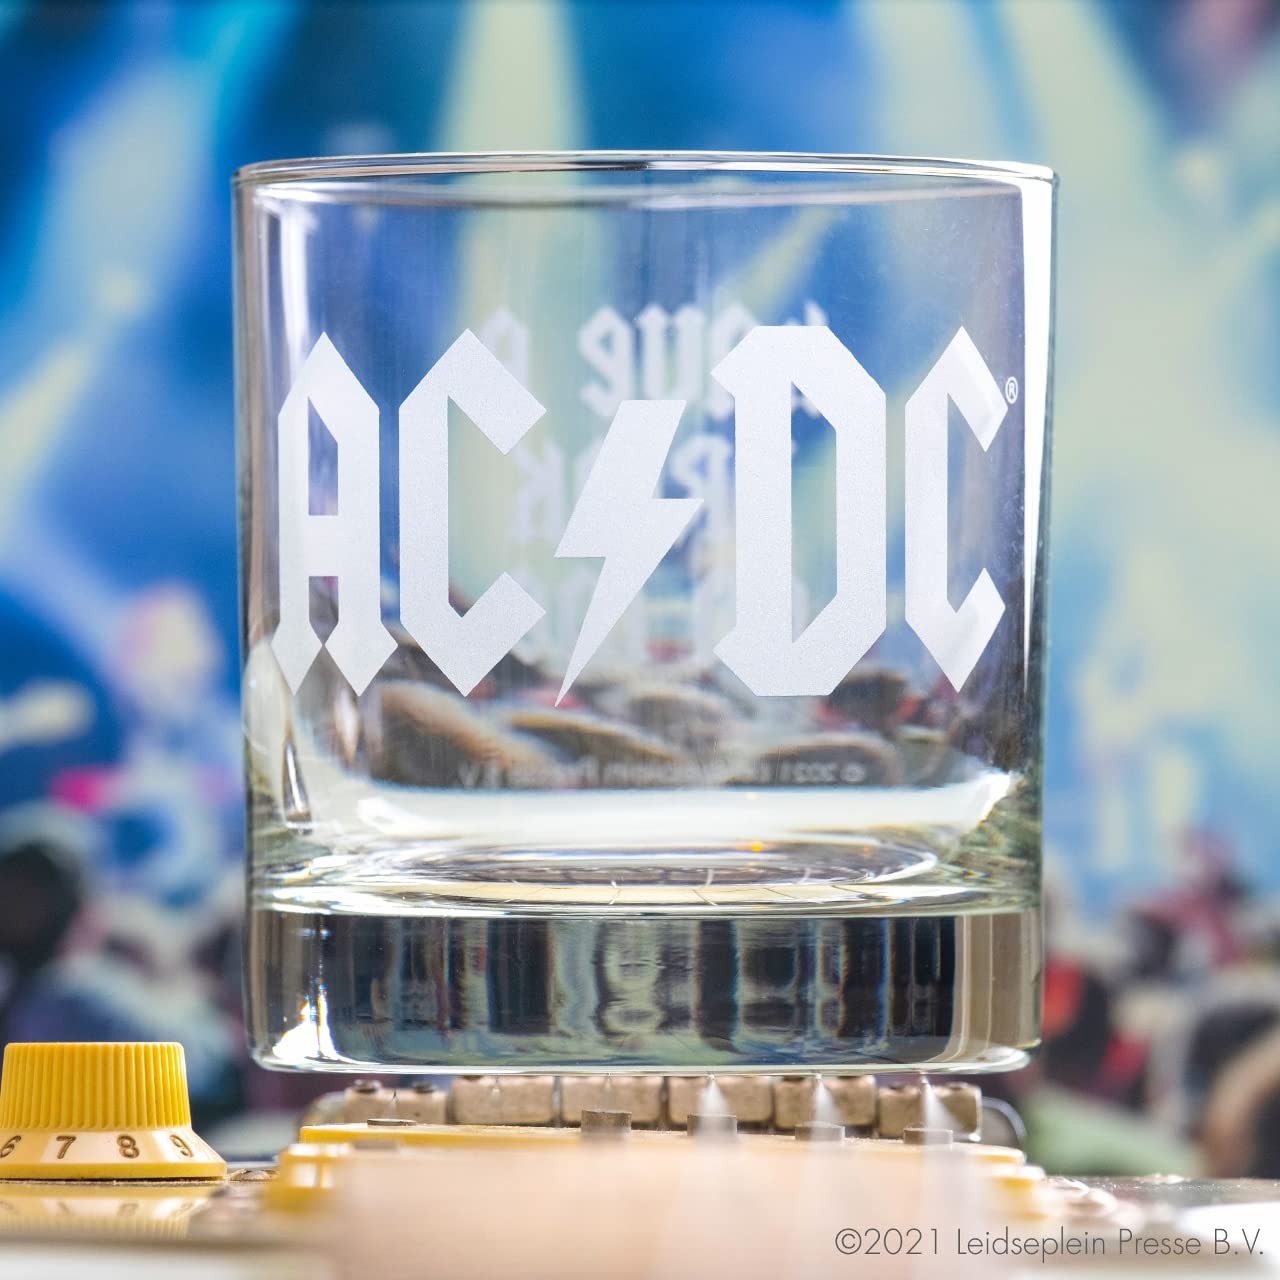 AC/DC Have a Drink on Me Etched Whiskey Glass - Officially Licensed, Premium Quality, Handcrafted Glassware, 11oz. Rocks Glass - Perfect Collectible Gift for Rock Music Fans, Birthdays, & AC/DC Lovers